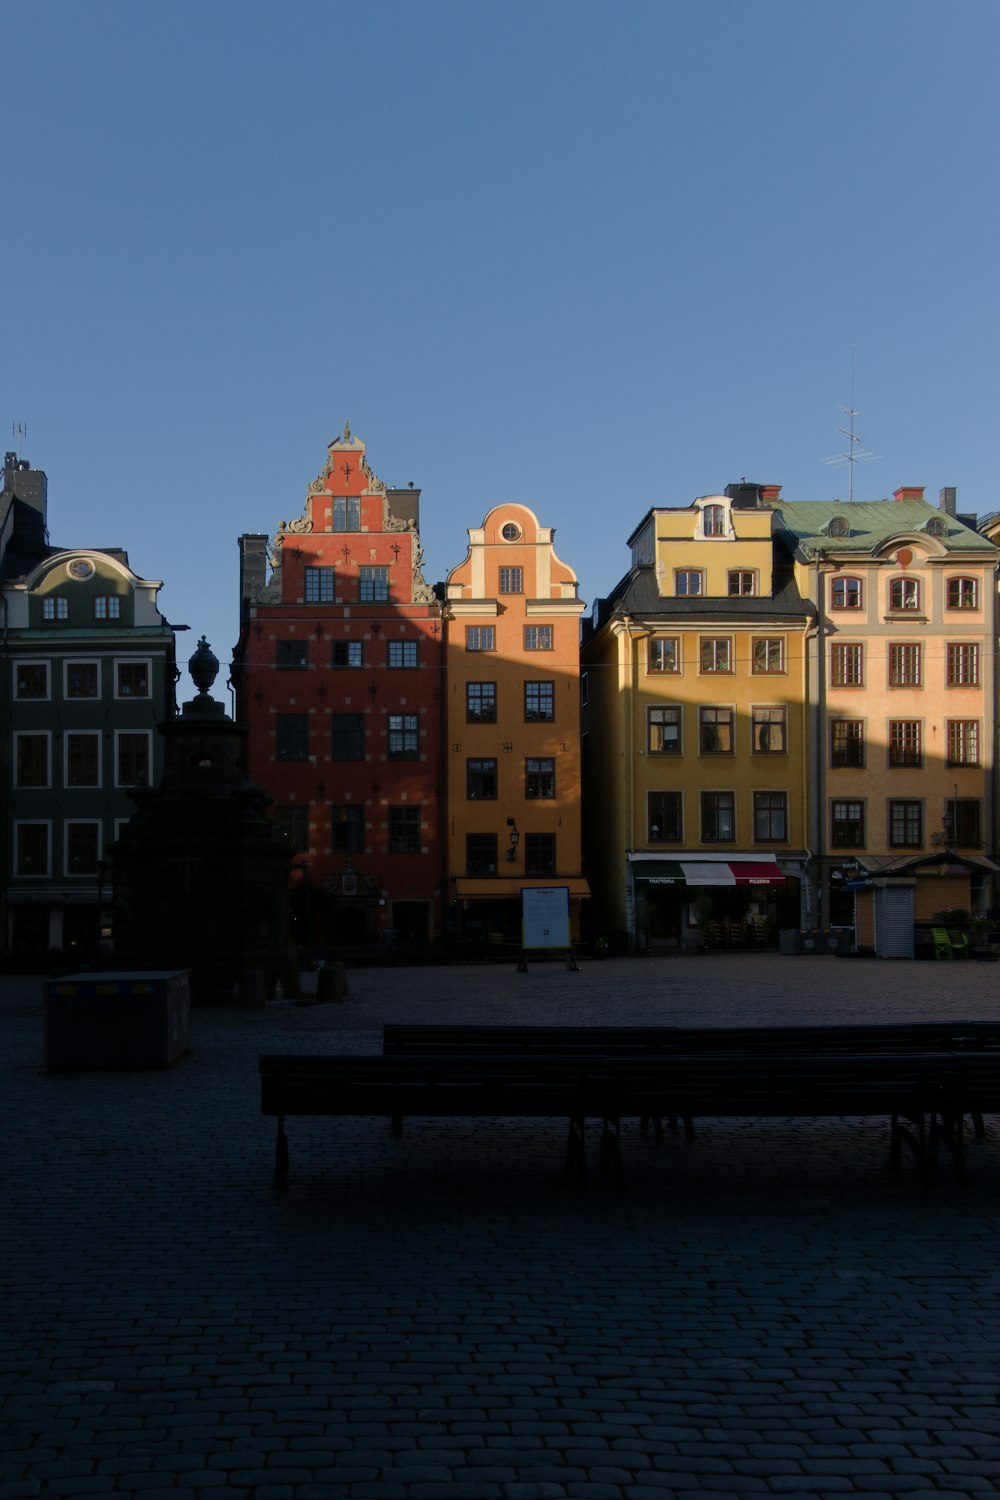 a bench sitting in front of a row of buildings